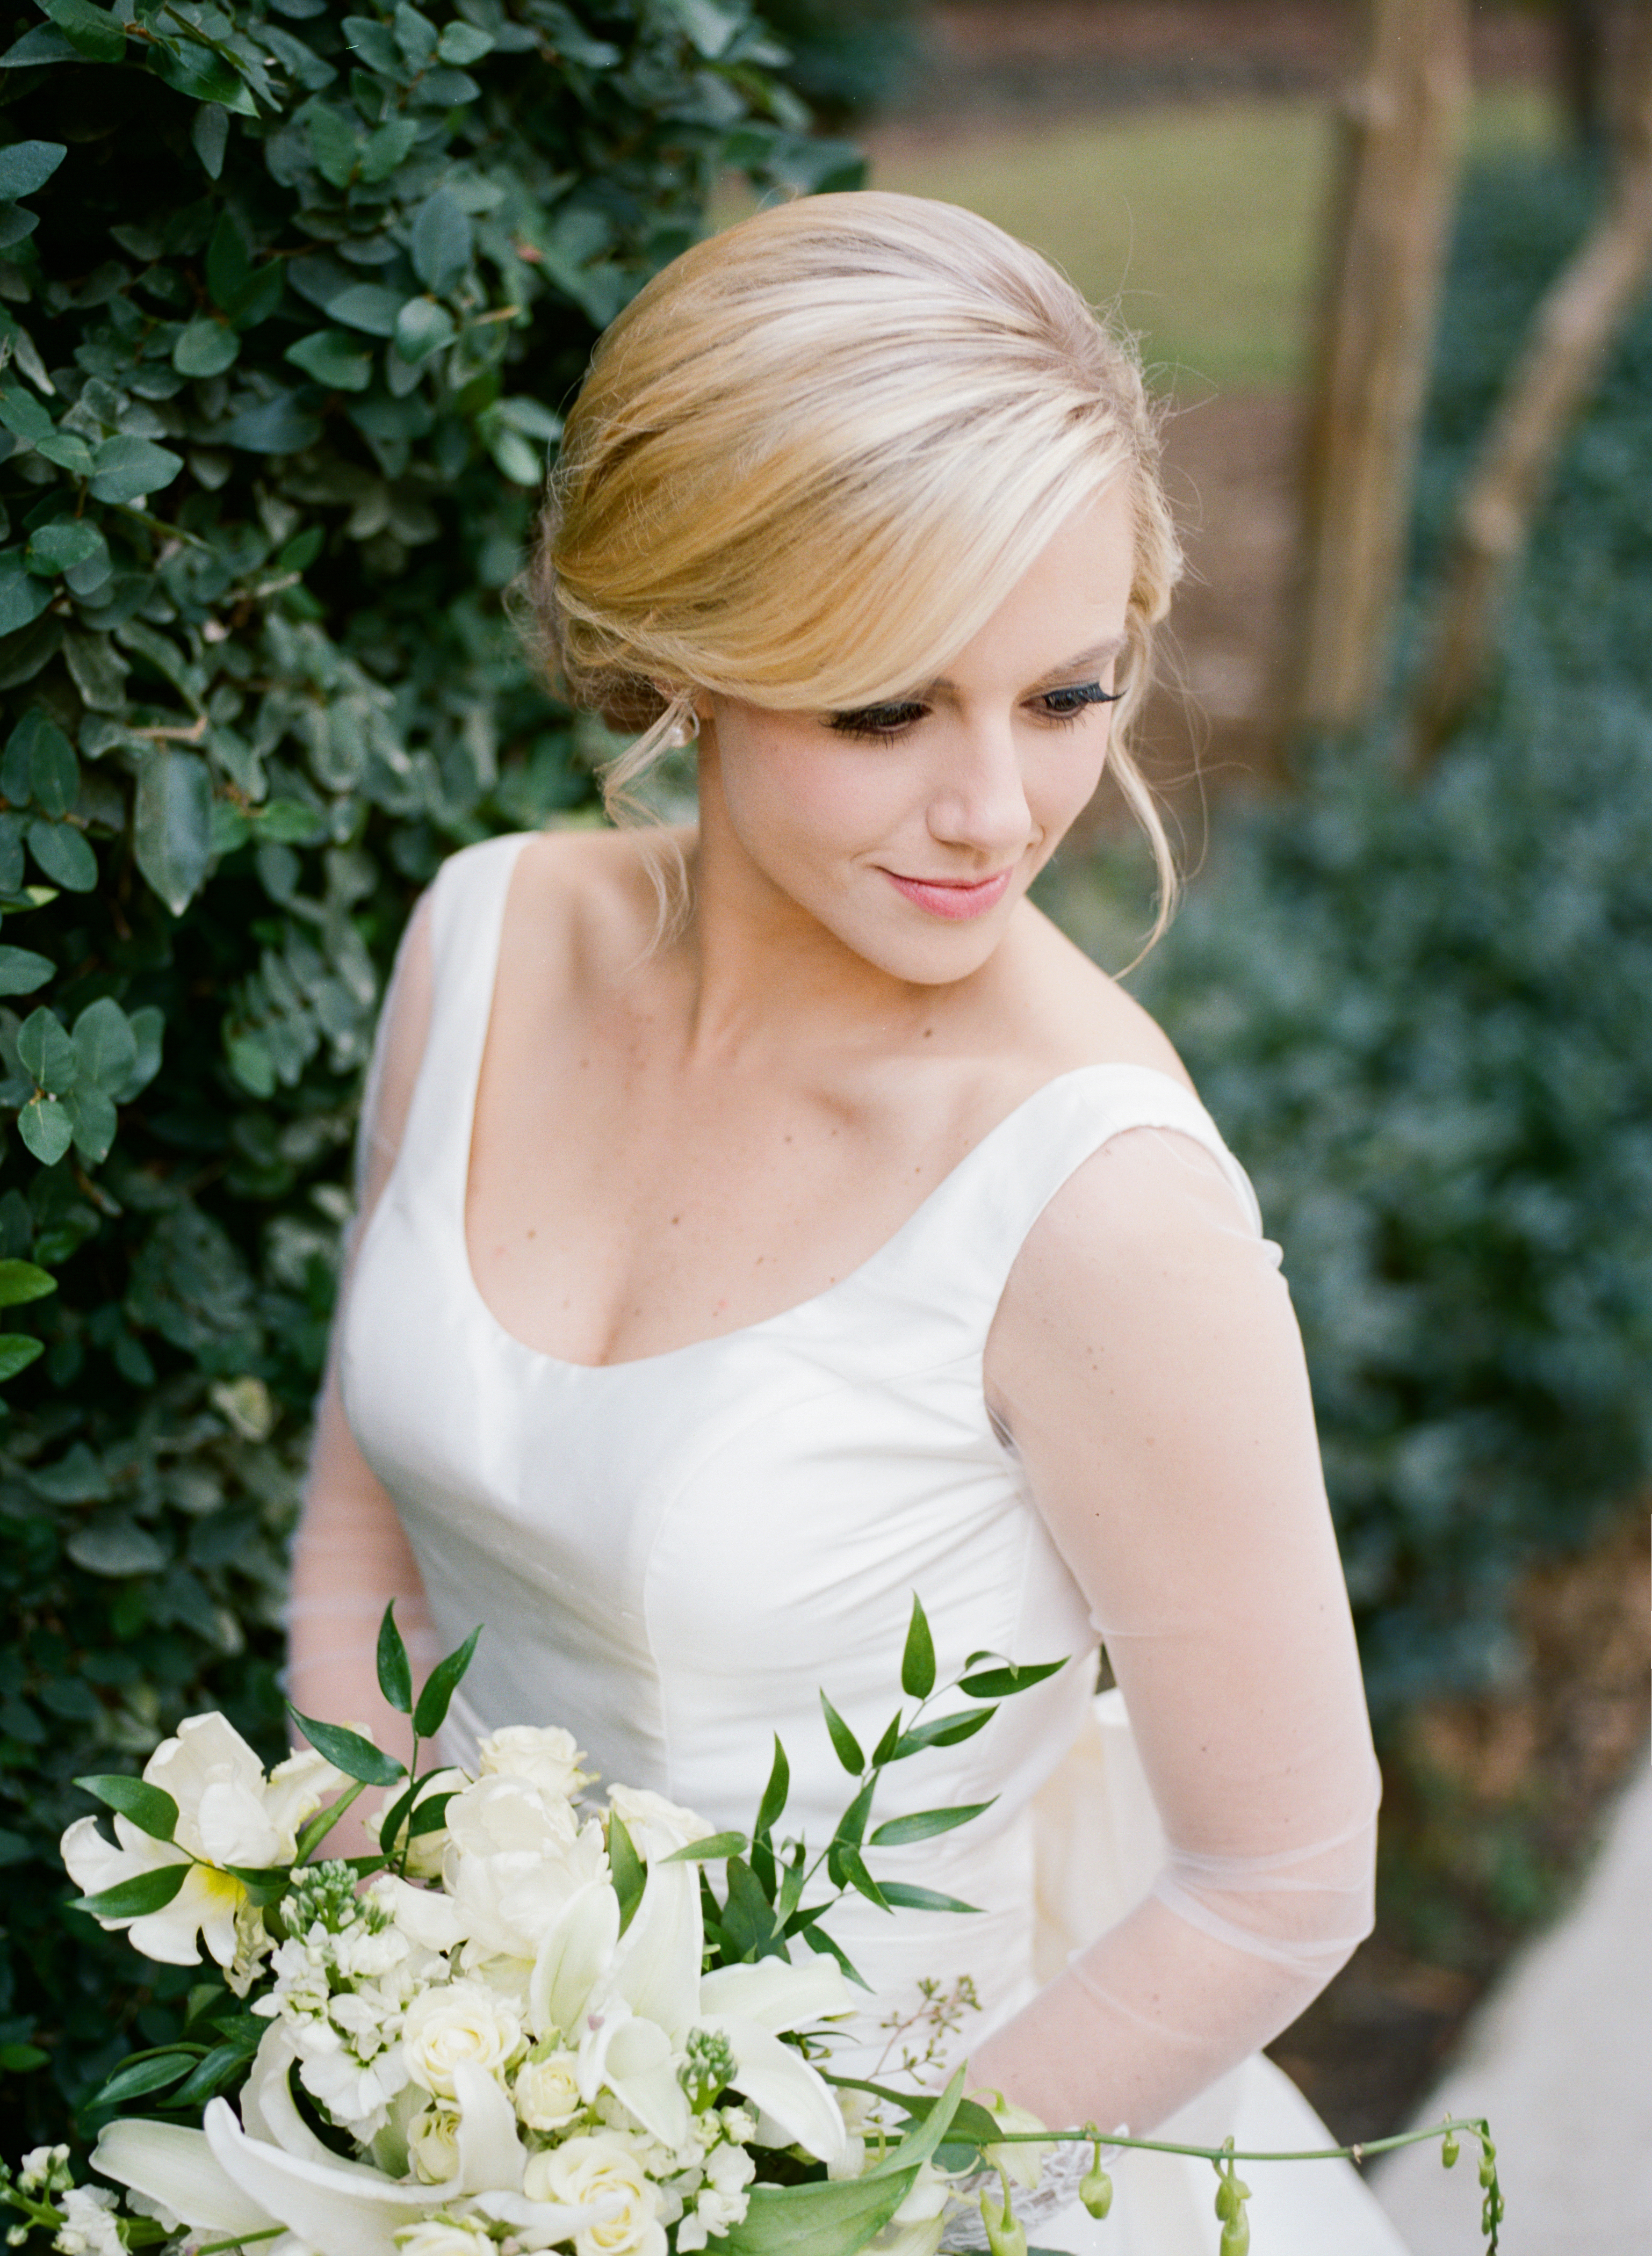 southern wedding traditions bride holding flowers photo